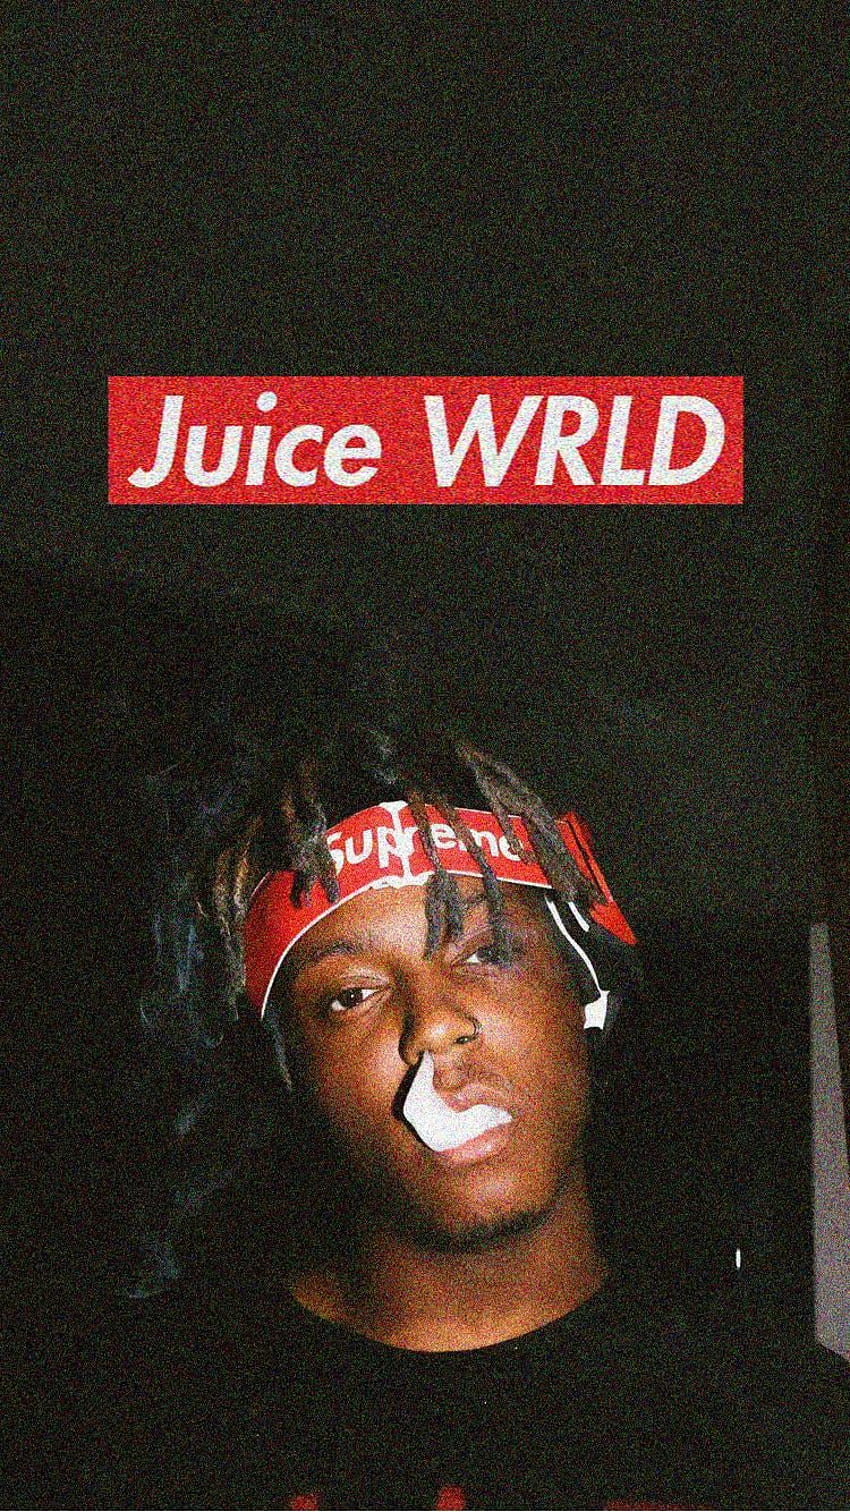 Made This And Thought It Came Out Nice Lemme Know What U Think : R JuiceWRLD, Inhale HD phone wallpaper